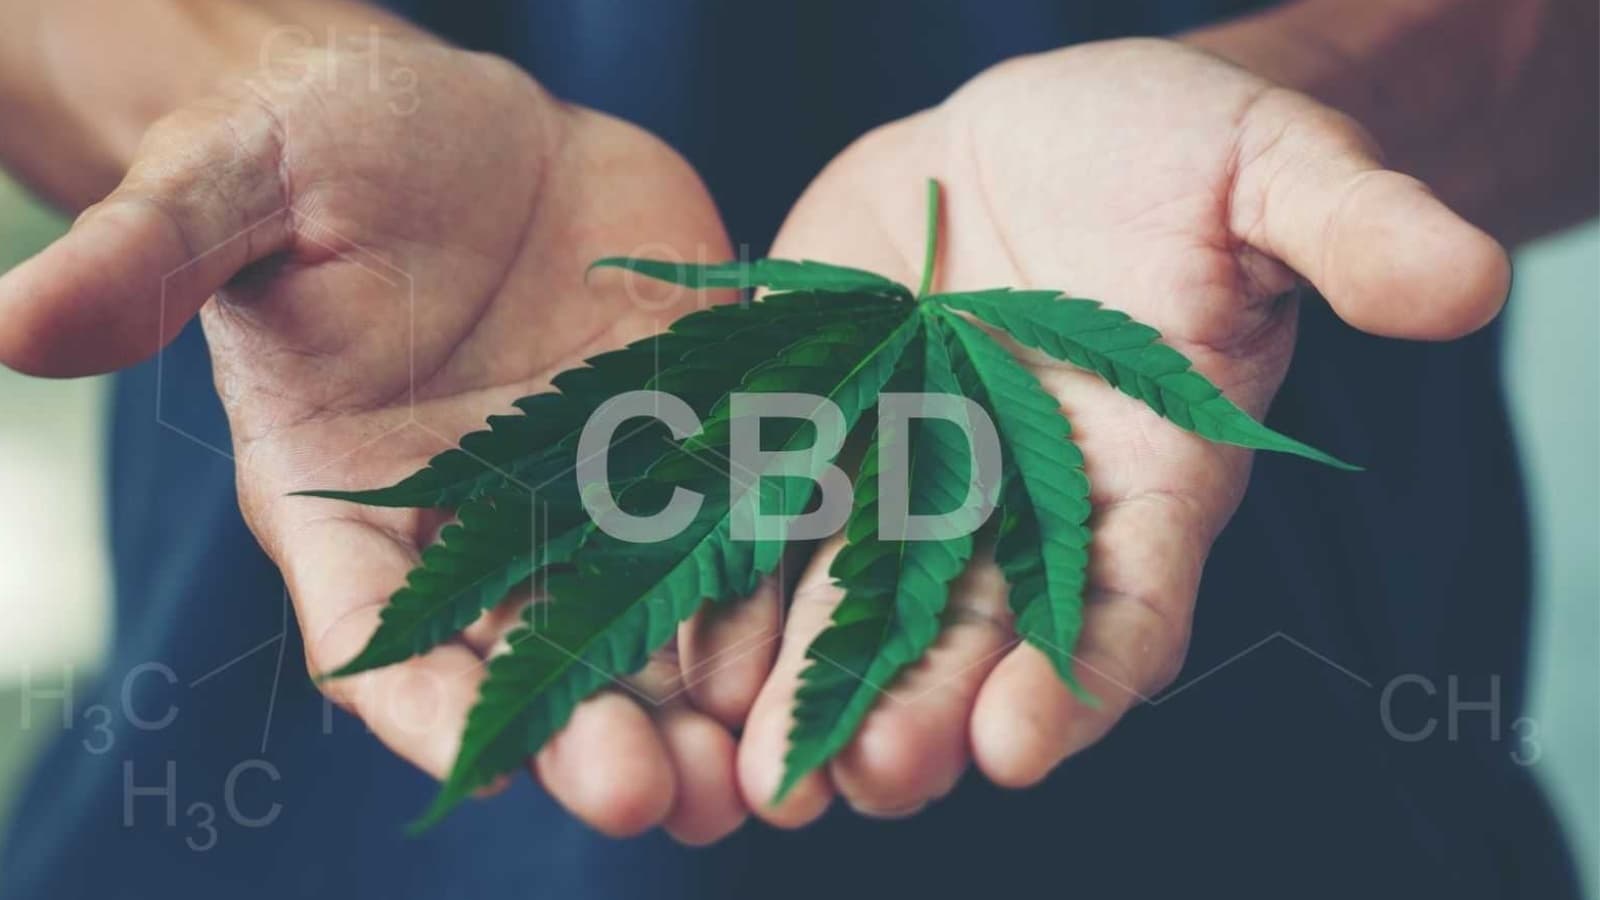 Buying CBD Oil: Guide, Process & Misconceptions